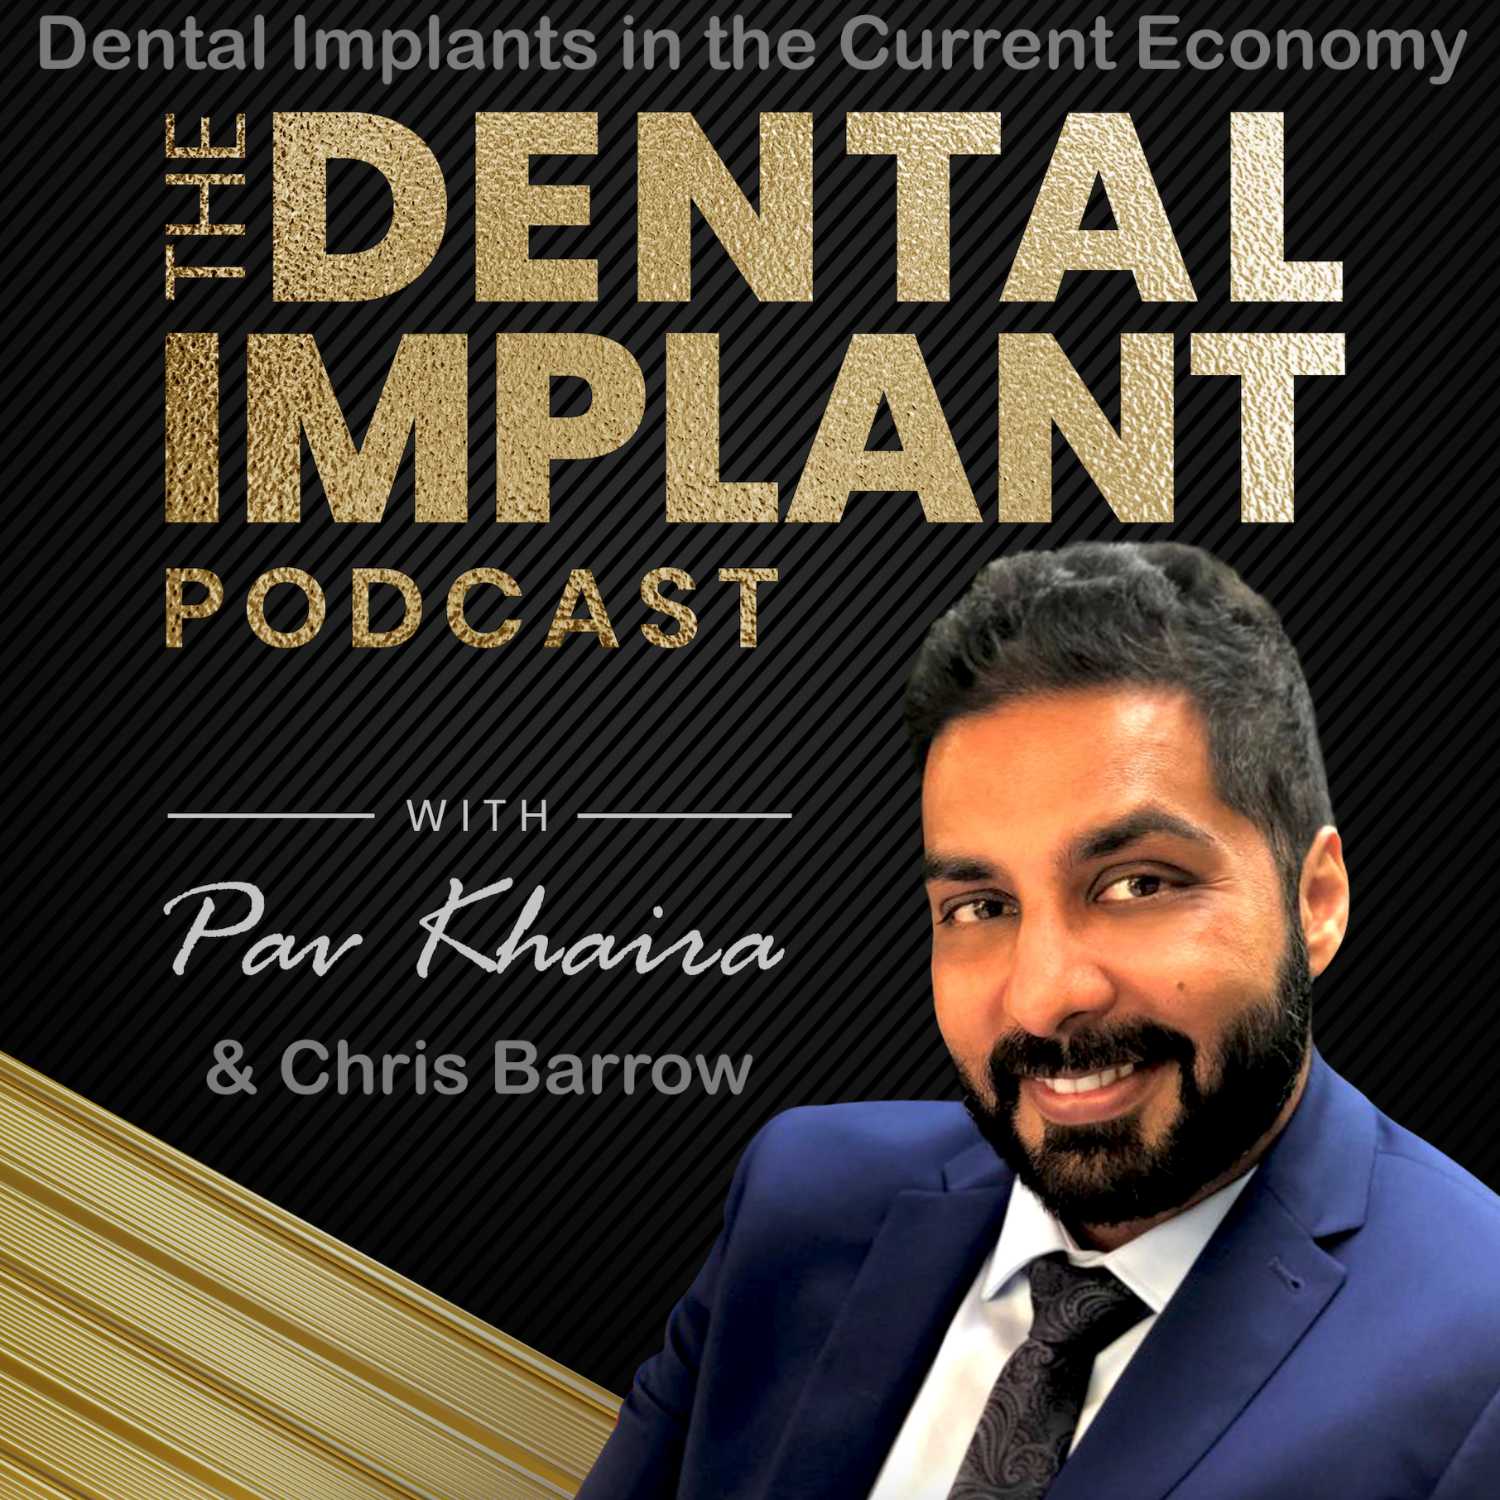 Implants in the Current Economic Environment